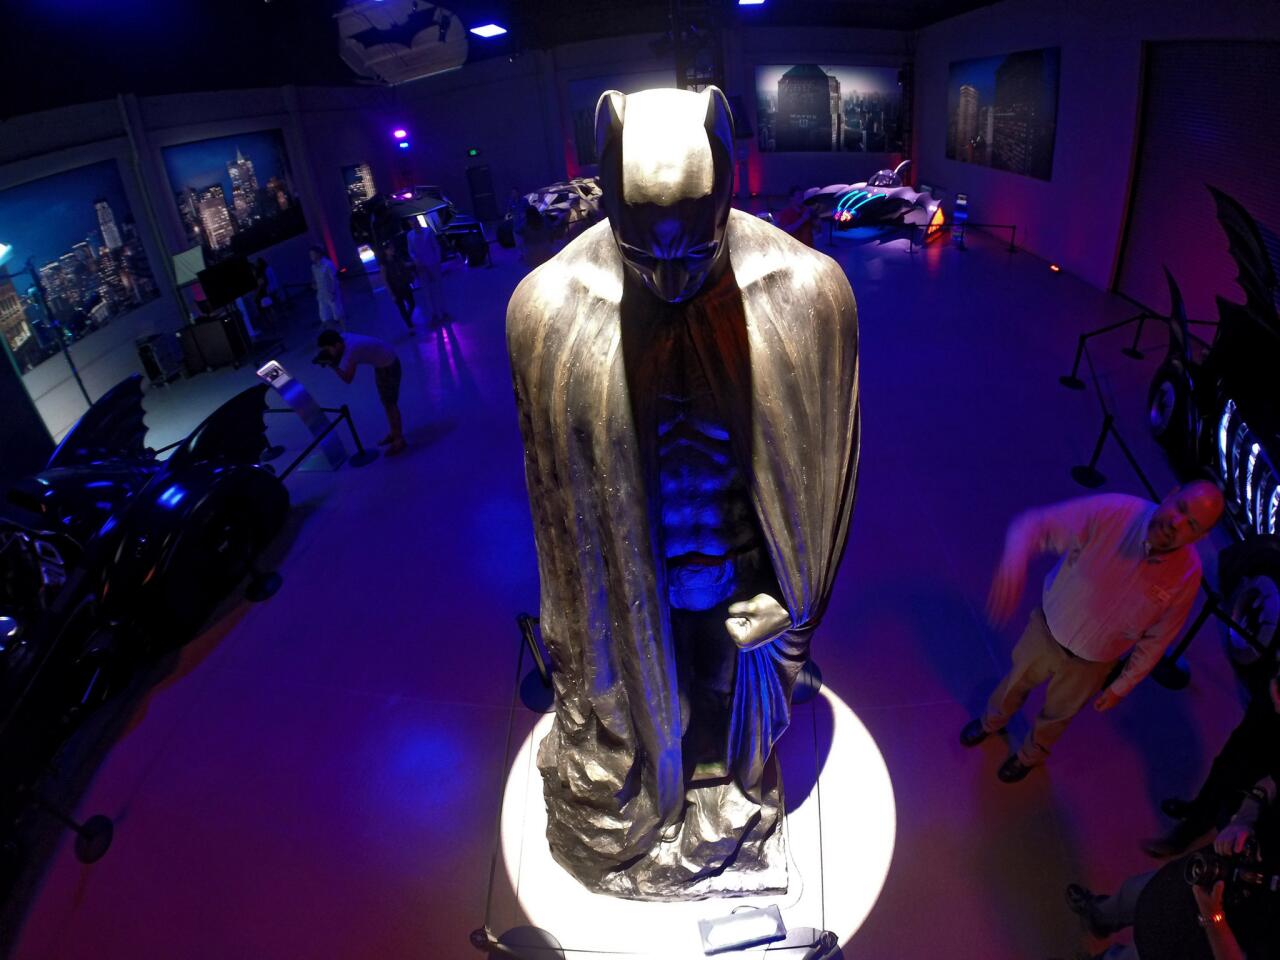 This larger than life statue of Batman is part of the Warner Bros. VIP Studio Tour's exhibit celebrating the 75th anniversary of Batman at the Warner Bros. lot in Burbank on Thursday, June 19, 2014. There are props, costumes and vehicles are on display at two locations within the tour.